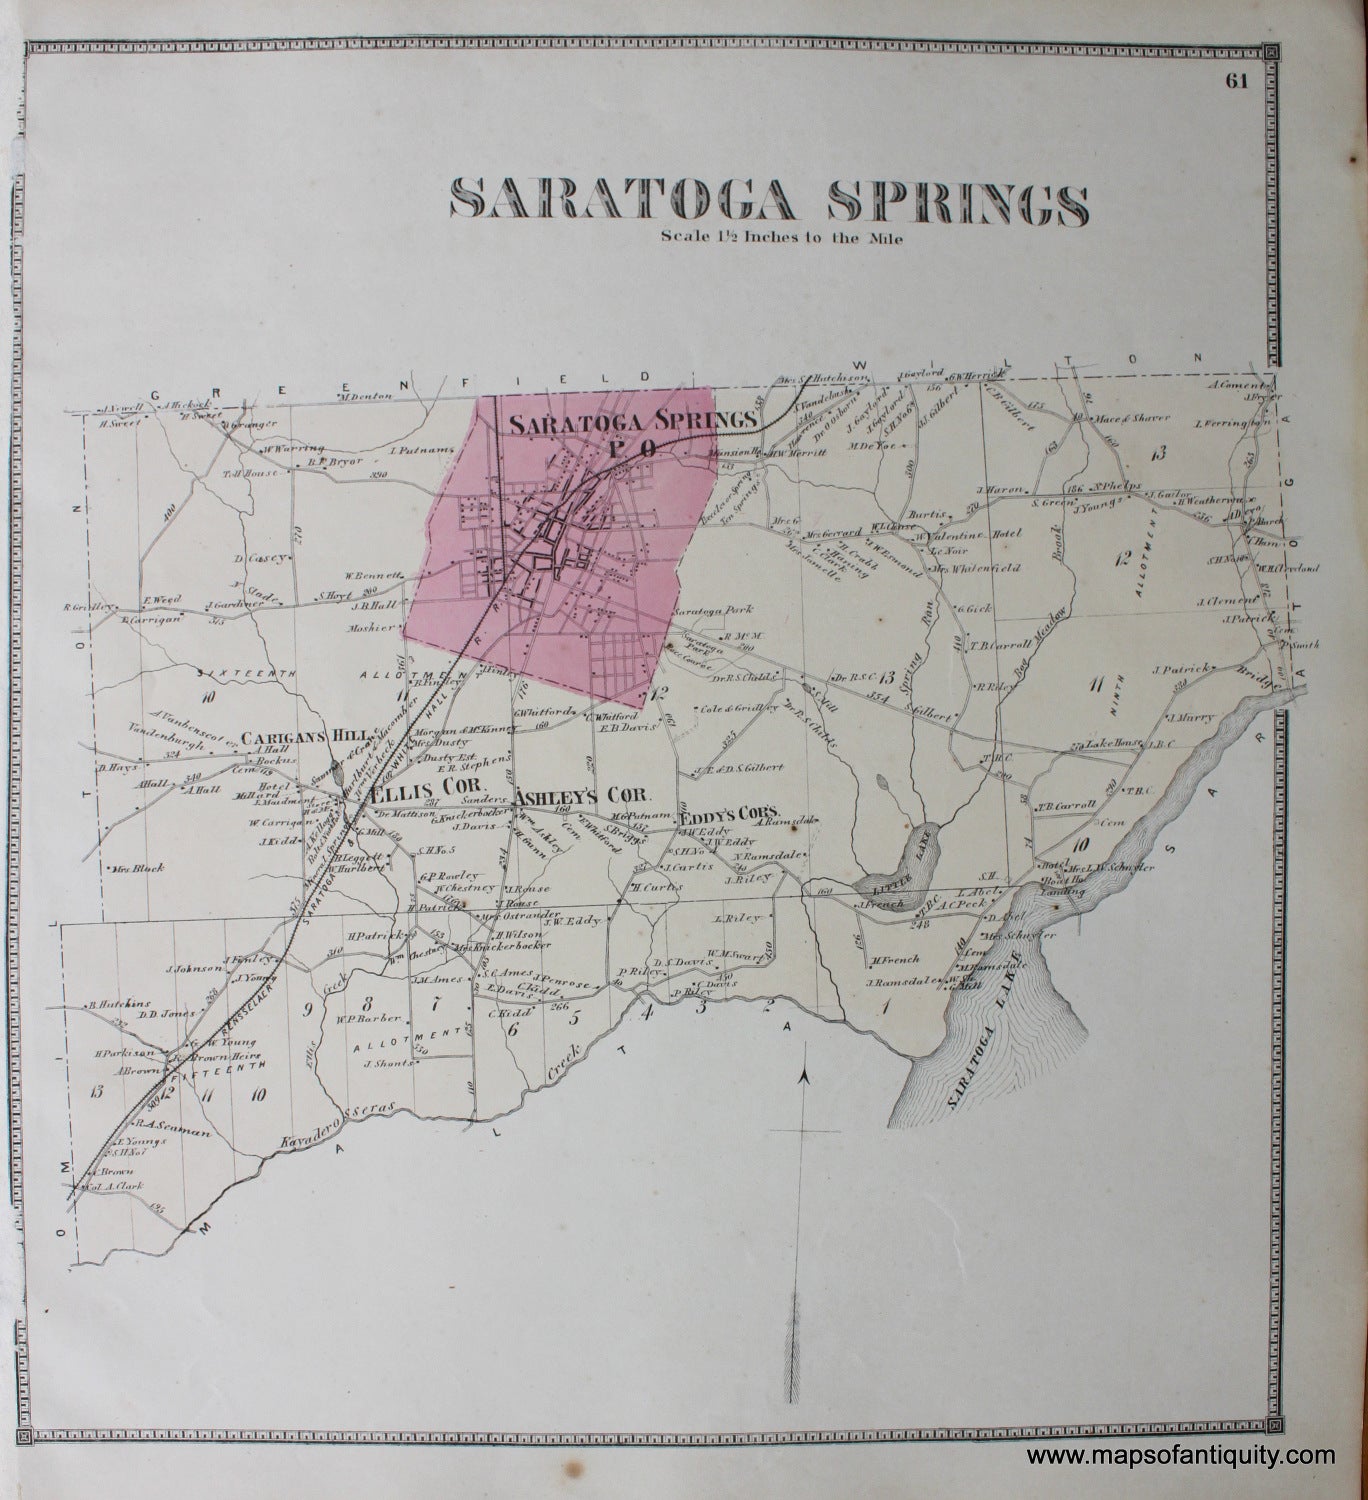 Hand-Colored-Engraved-Antique-Map-Saratoga-Springs-(NY)-United-States-Northeast-1866-Stone-and-Stewart-Maps-Of-Antiquity